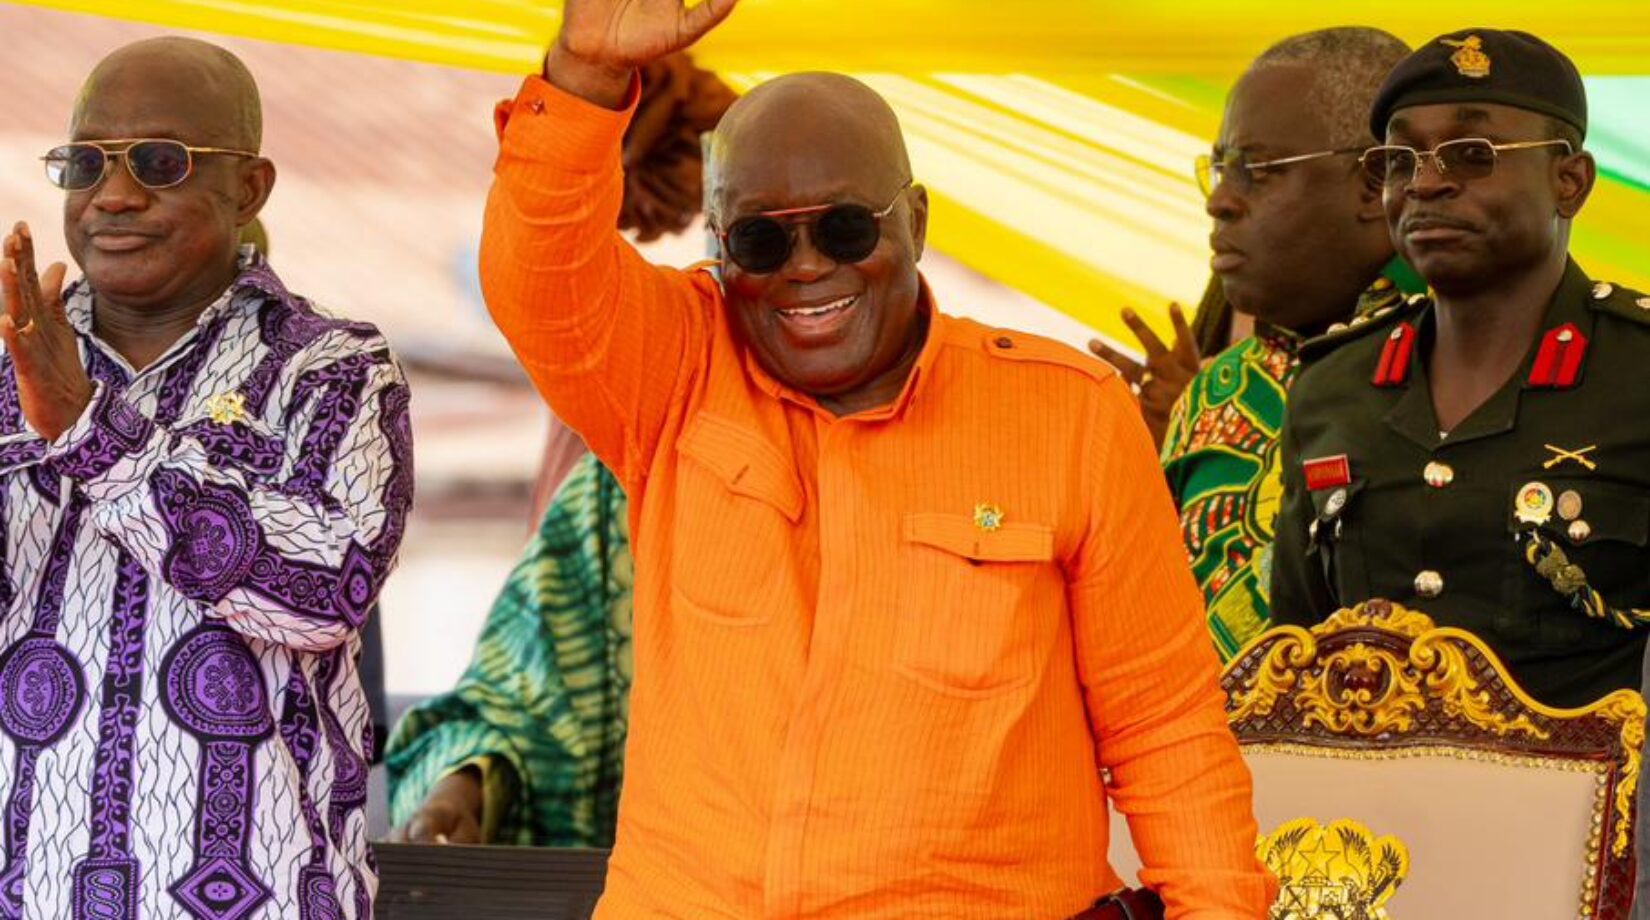  AKUFO-ADDO ANNOUNCES GH¢1,308 AS PRICE PER BAG OF COCOA; THE HIGHEST IN WEST AFRICA